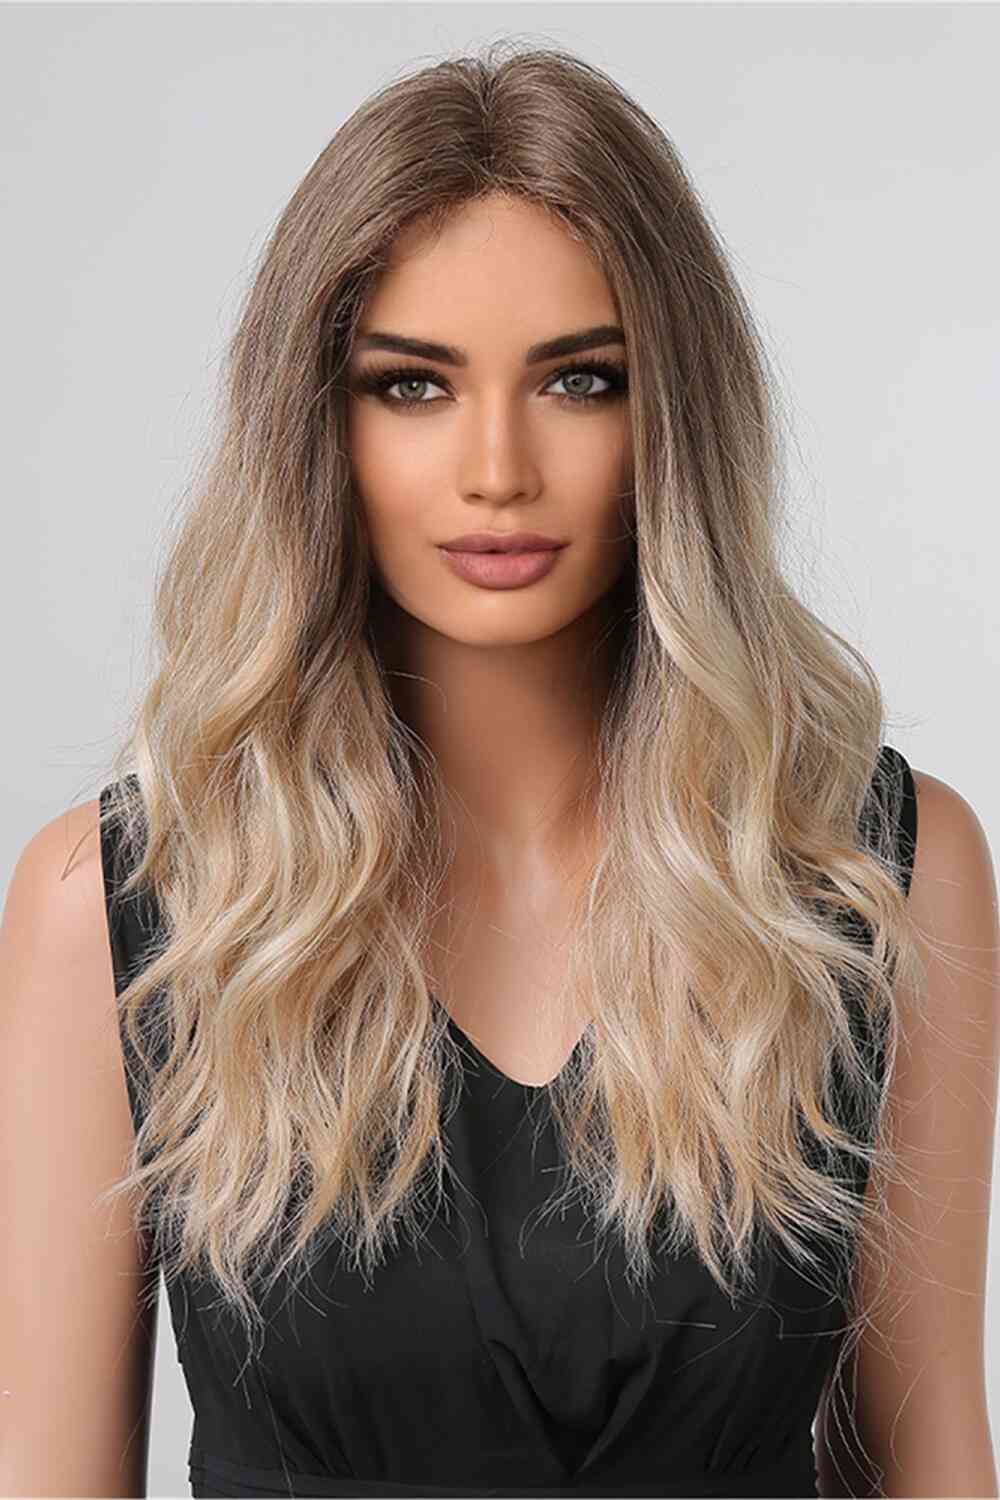 13*2" Long Wave Lace Front Wigs 24" Long 150% Density Light Brown/Blonde Ombre One Size 